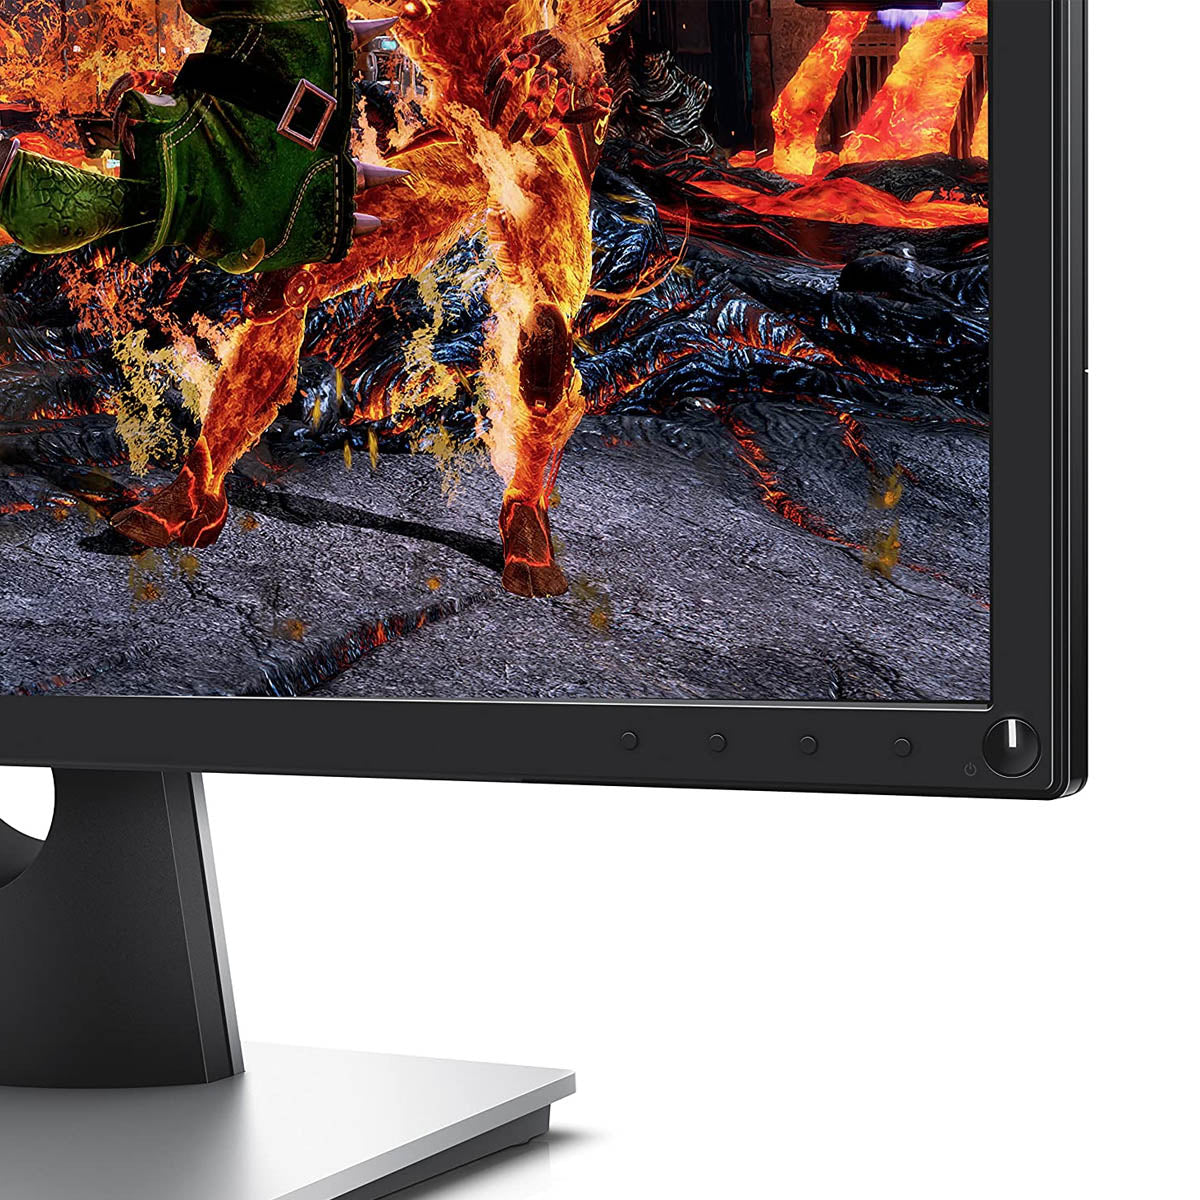 Dell 24 Inch Full HD Gaming Monitor SE2417HG with TN LCD Panel 60Hz Refresh Rate and 2ms Response Time